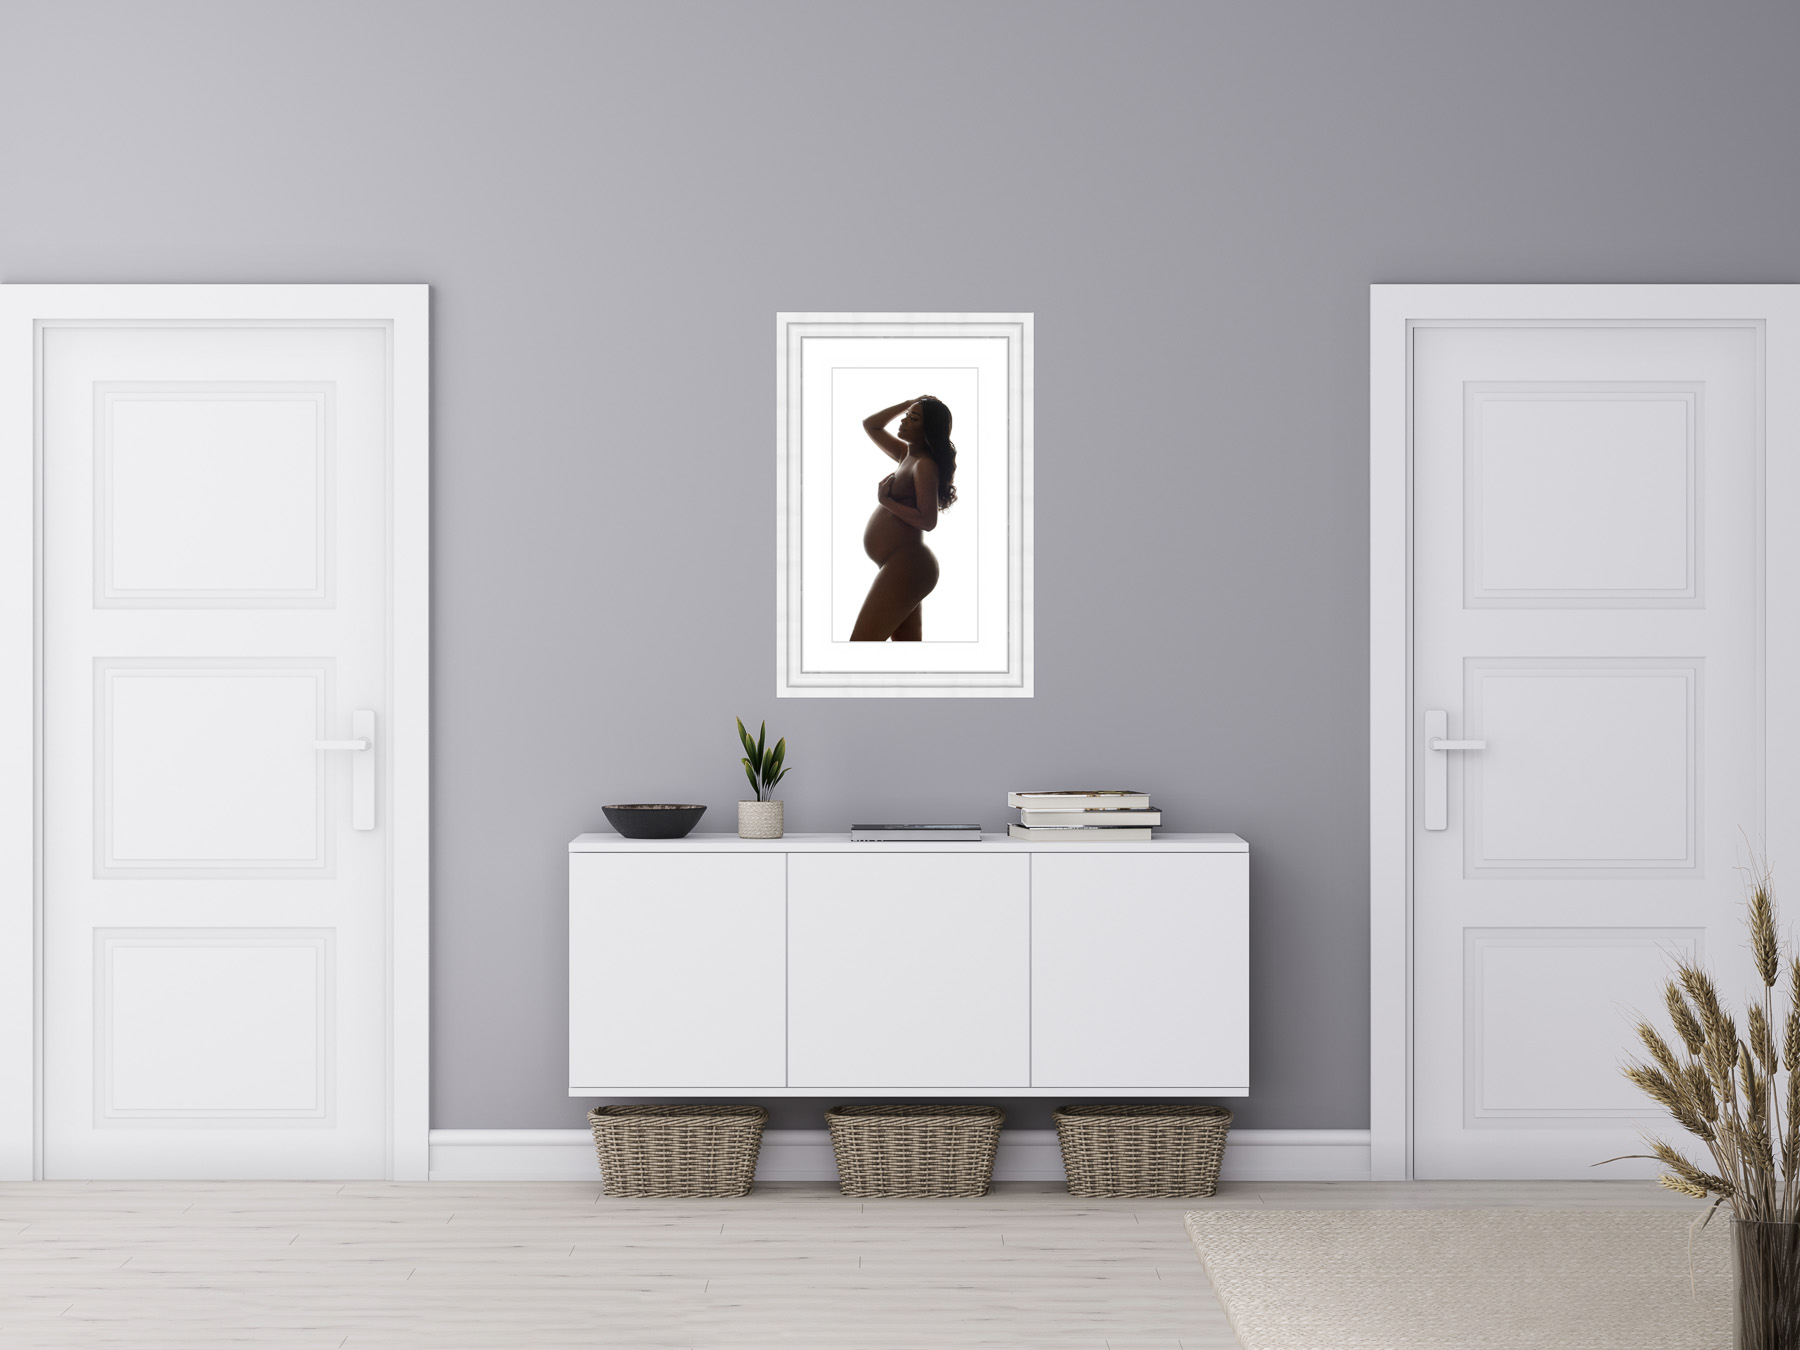 Perfectly framed maternity portrait hanging in a walkway of a stylish, modern home.